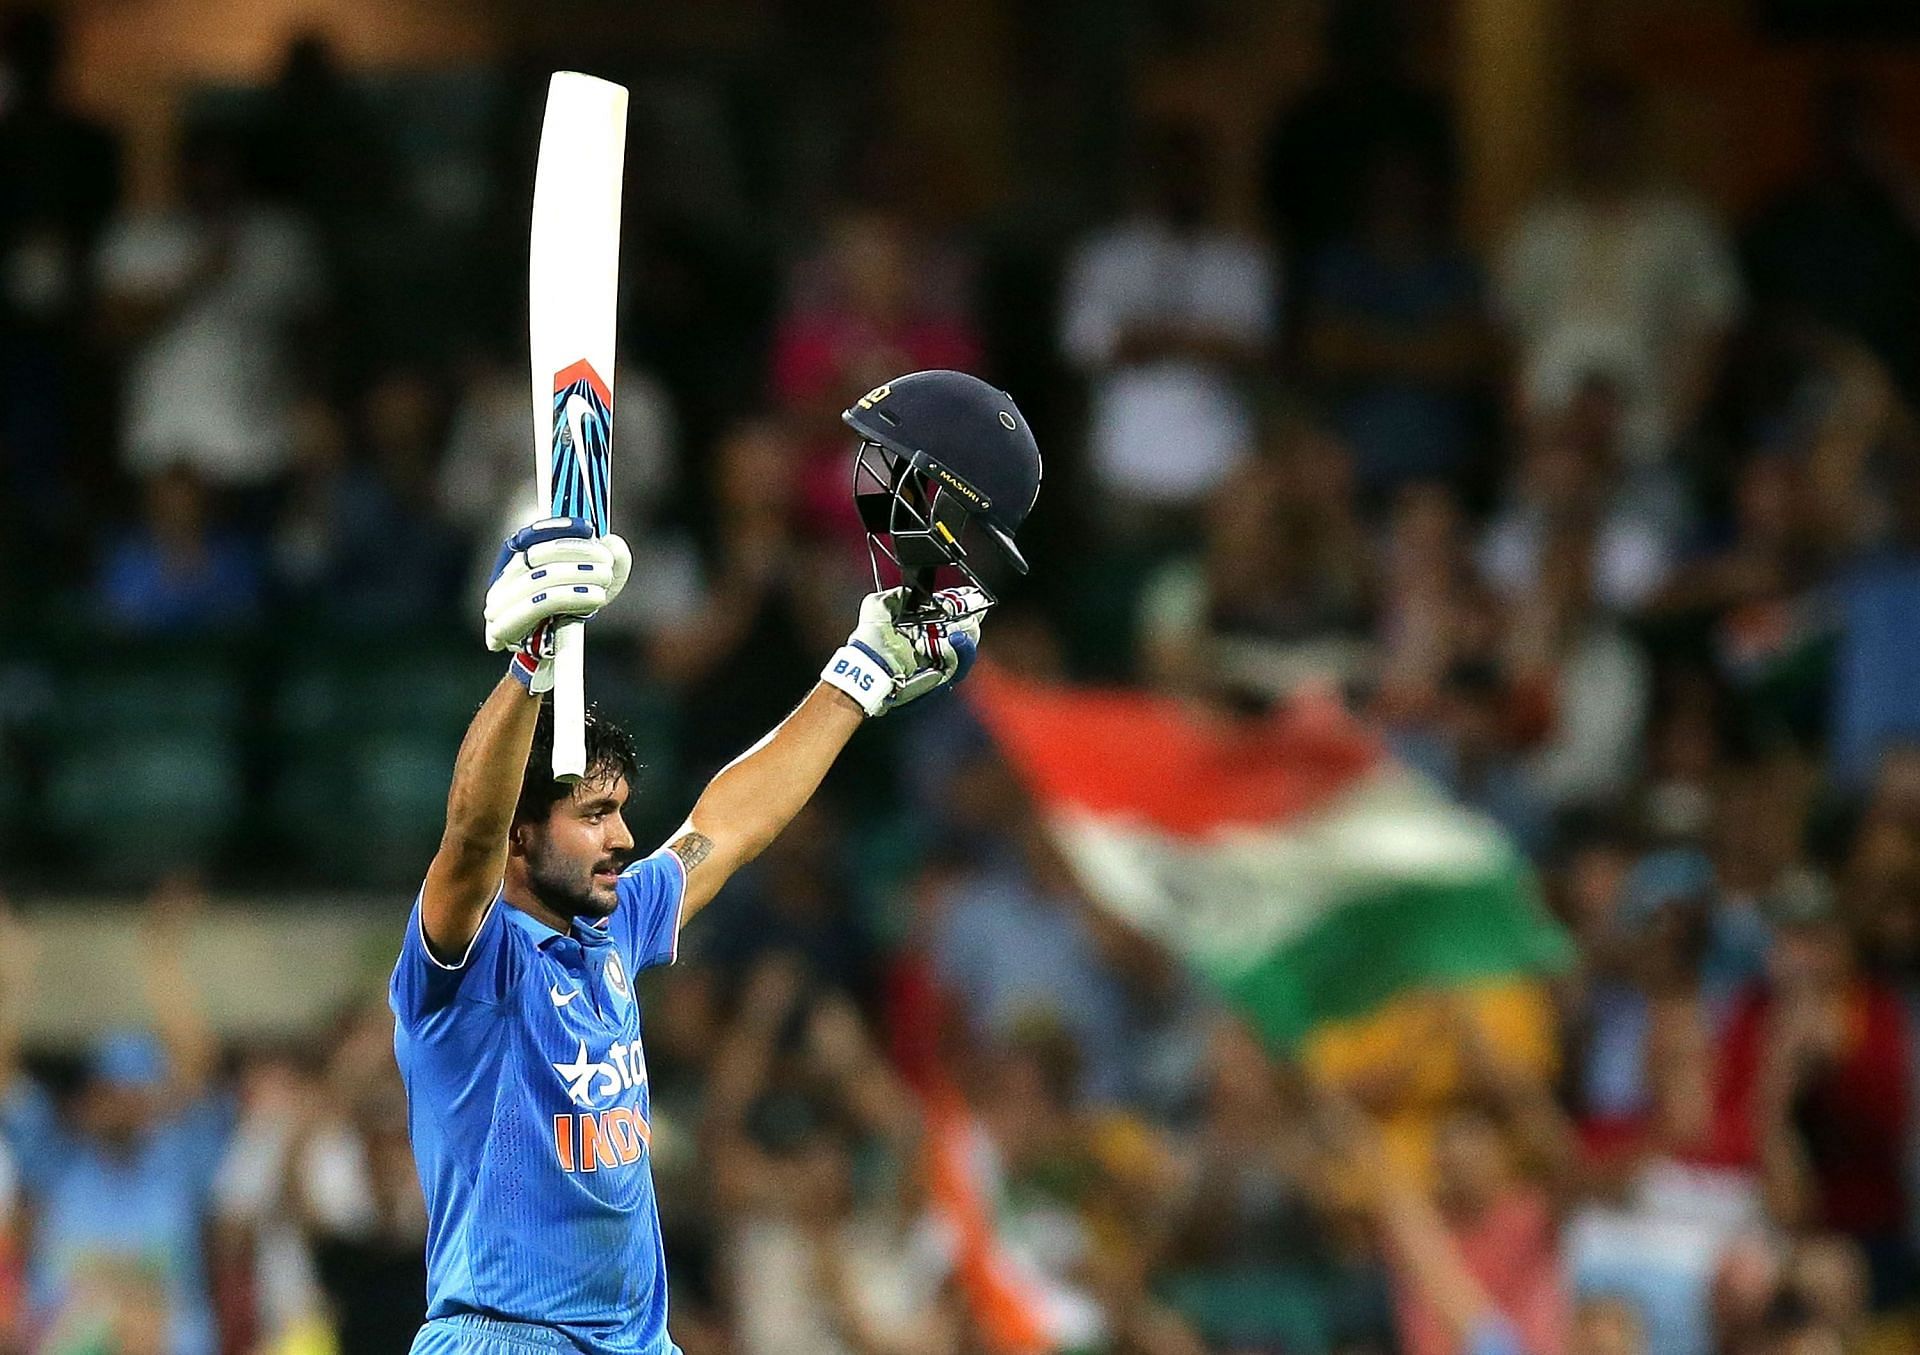 Manish Pandey celebrates a match-winning 104* against Australia in just his 4th ODI